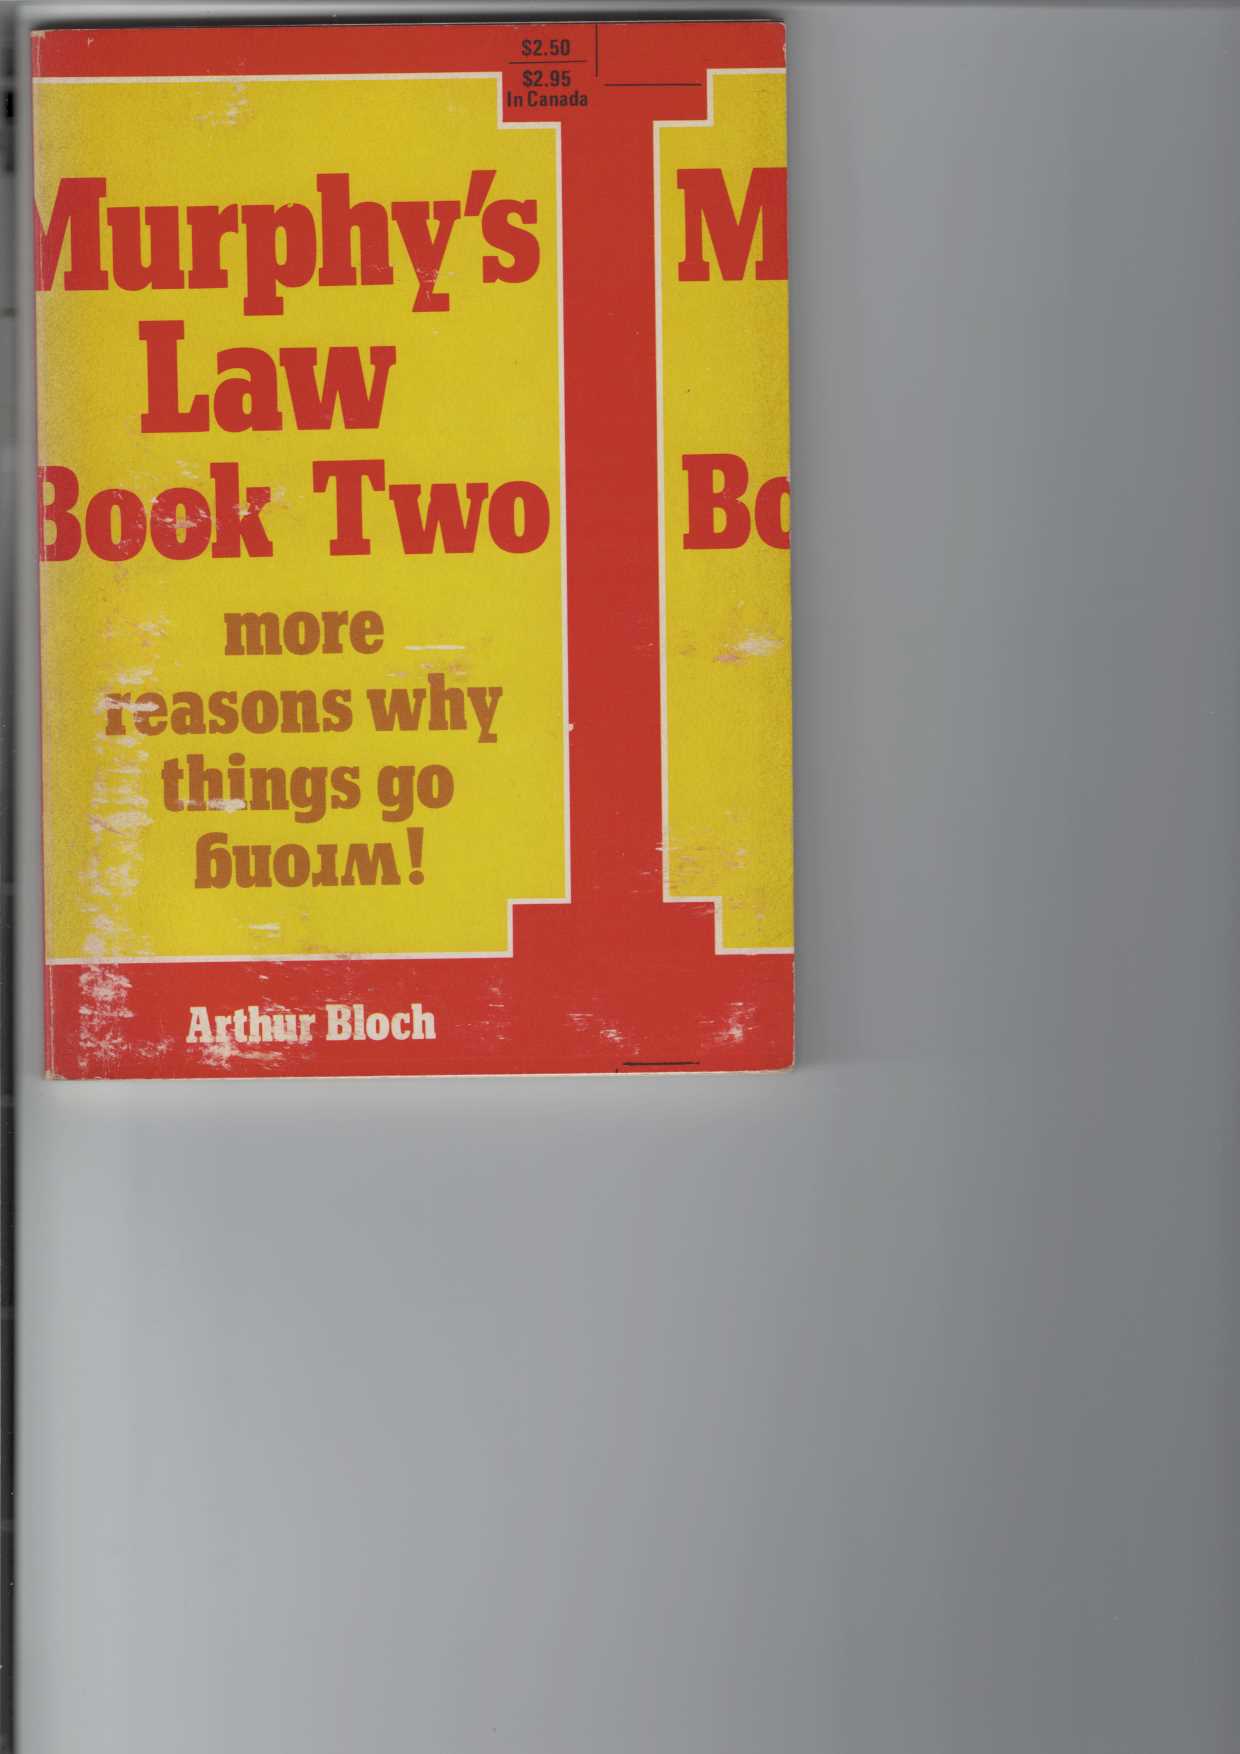 Bloch, Arthur:  Murphys Law. Book Two, more reasons why things go wrong! 